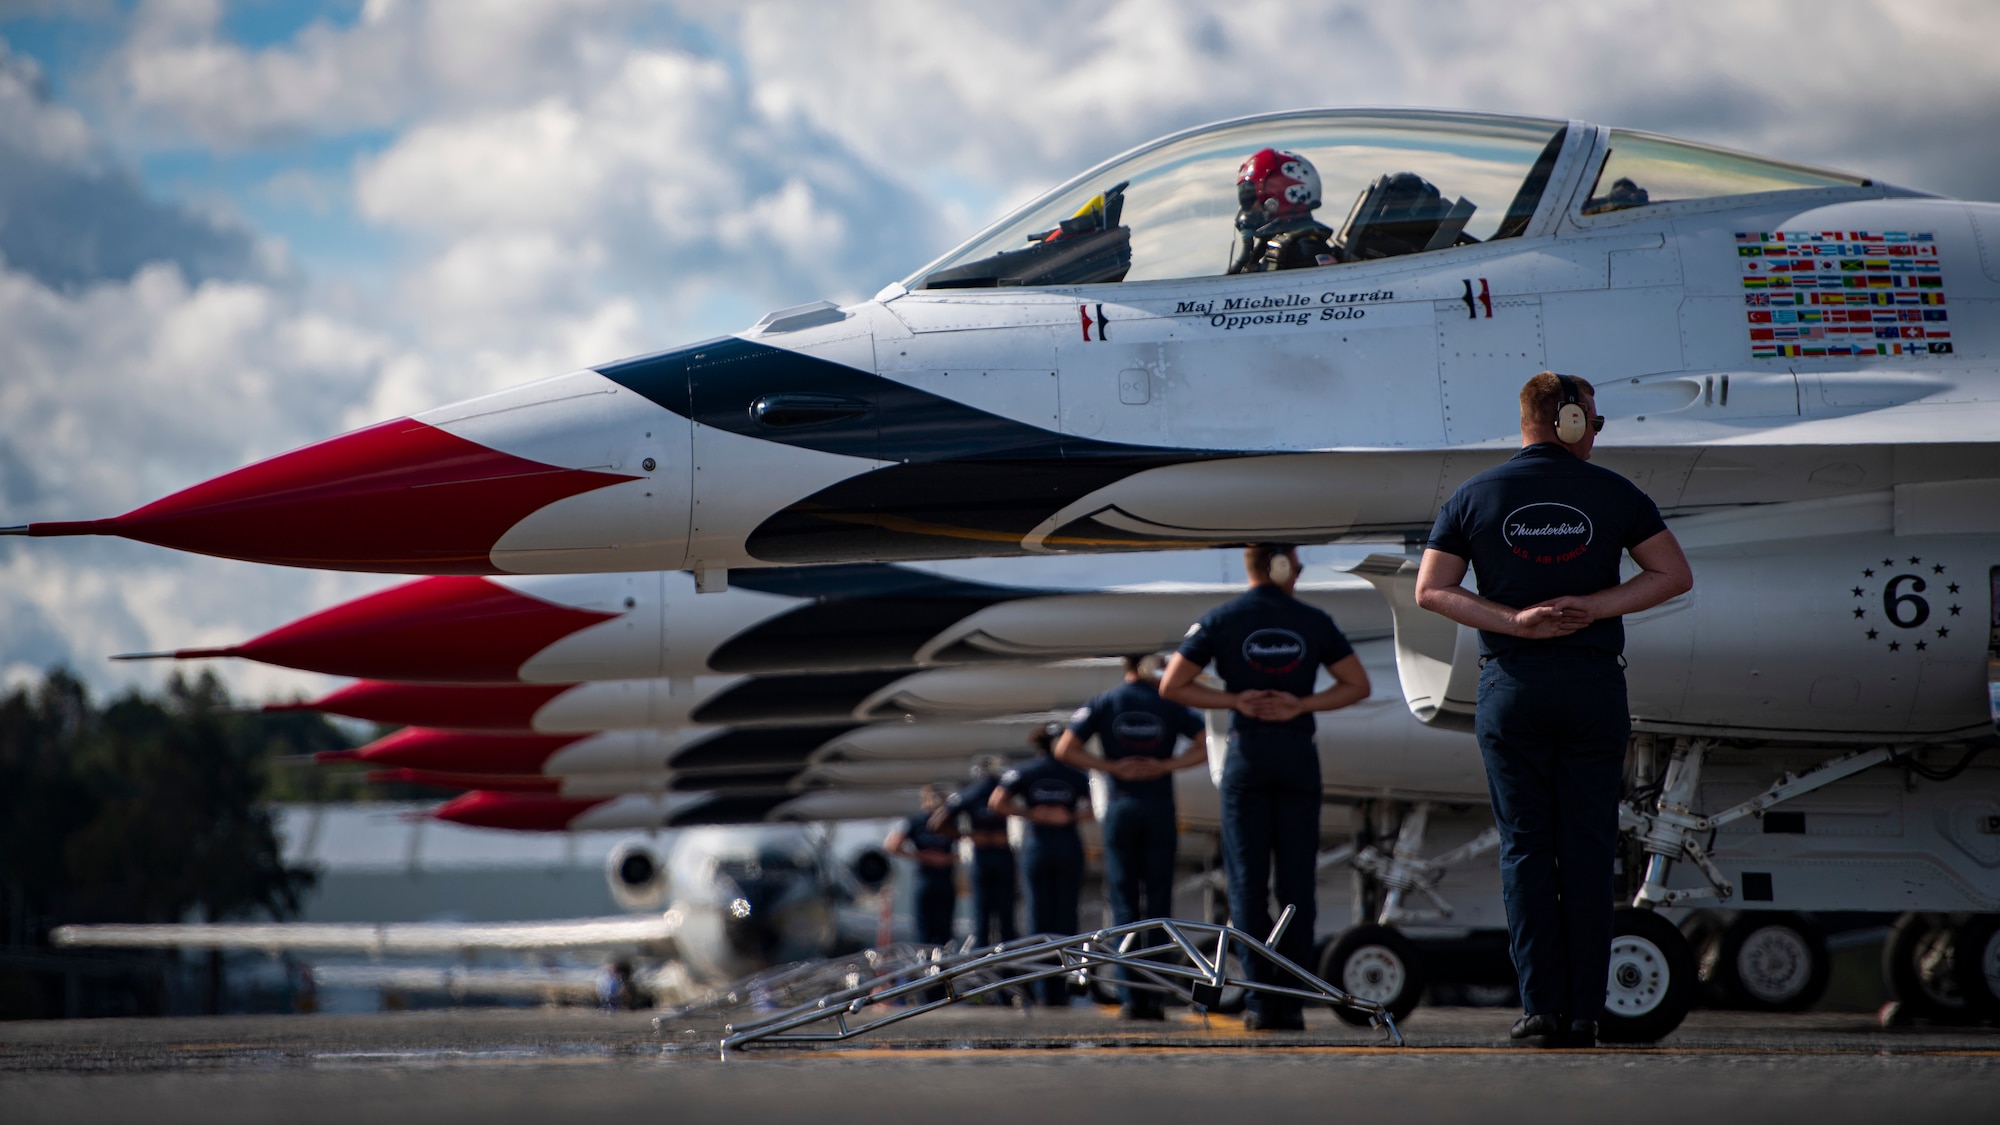 The United States Air Force Air Demonstration Squadron "Thunderbirds" perform at the F-AIR Colombia Air Show in Rionegro, Colombia, July 13, 2019. The team traveled to Colombia for the first time in more than 50 years to celebrate the 100th anniversary of the Colombian Air Force. (U.S. Air Force photo by Senior Airman Andrew D. Sarver)